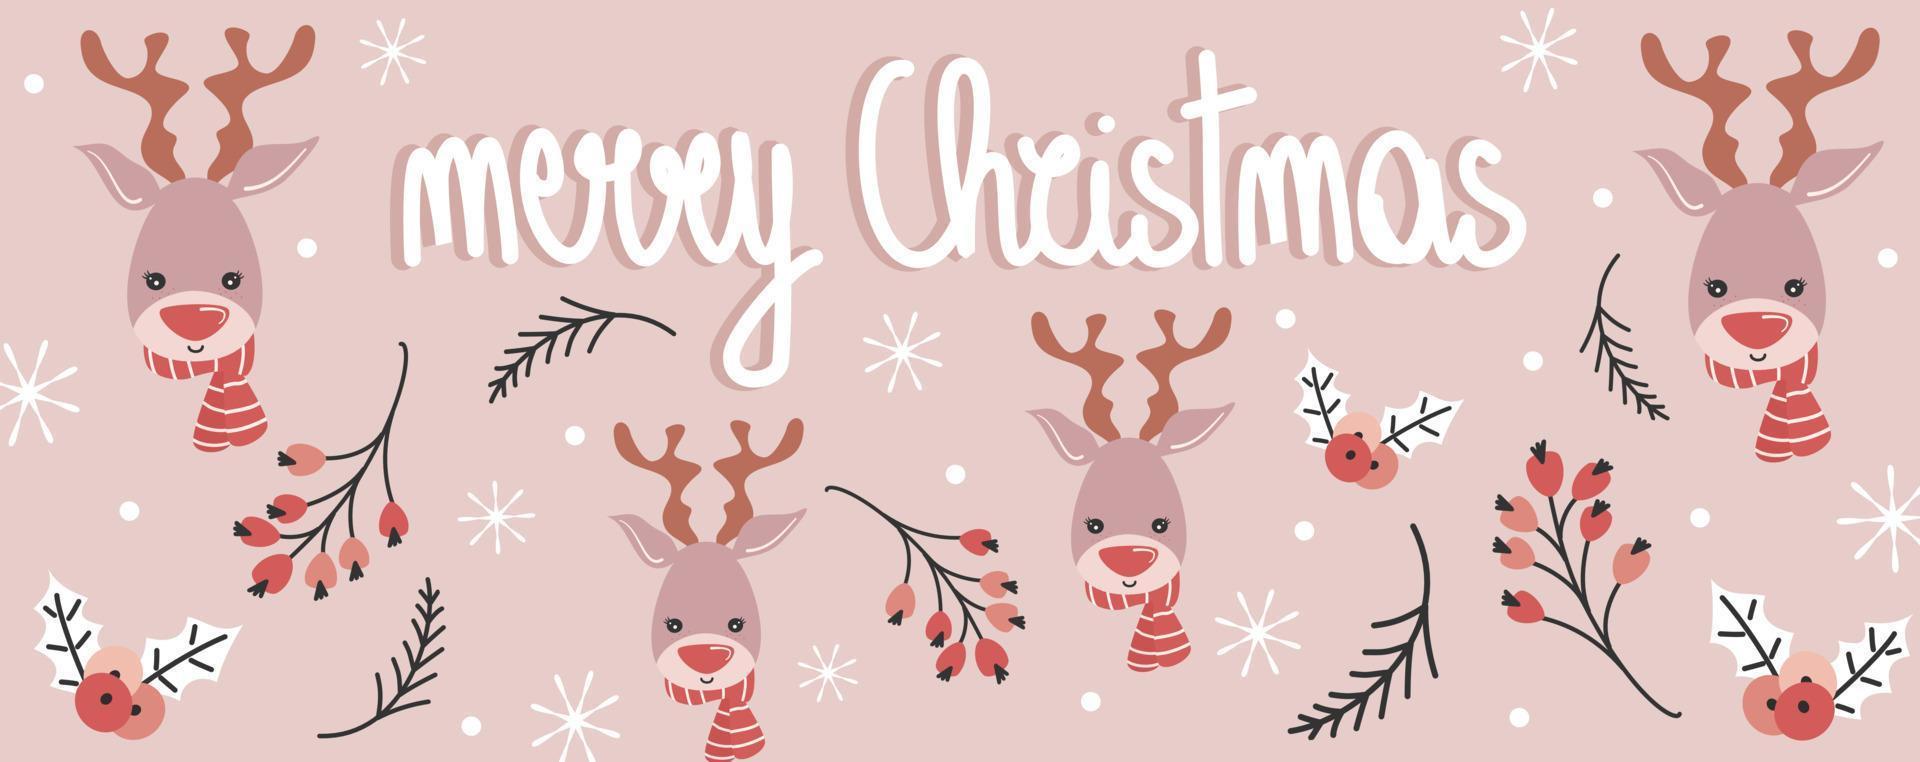 cute holidays vector design horizontal banner template with hand drawn lettering merry christmas text, cartoon character reindeer, branch with berries, holly, snow and snowflakes on pink background